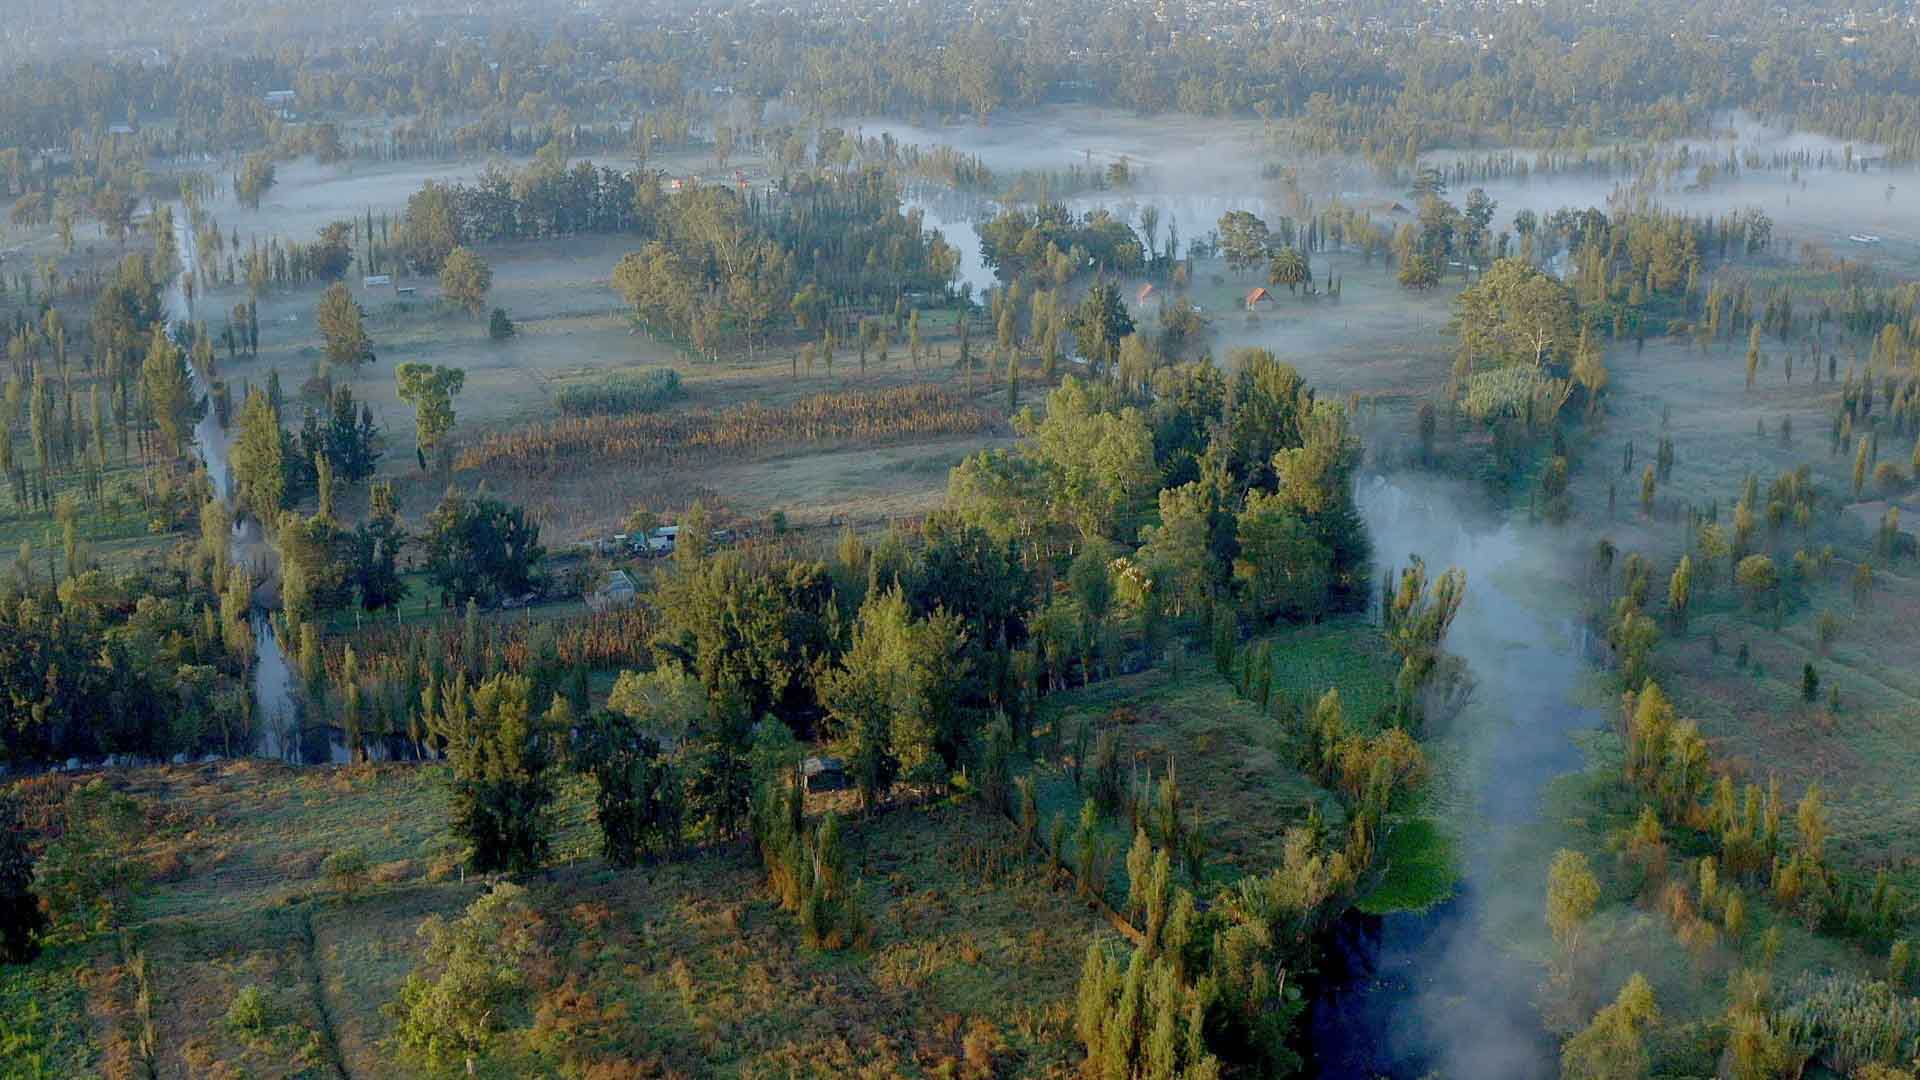 Aerial view of Xochimilco, the last remanants of the canals built by the Aztecs in ancient Mexico City